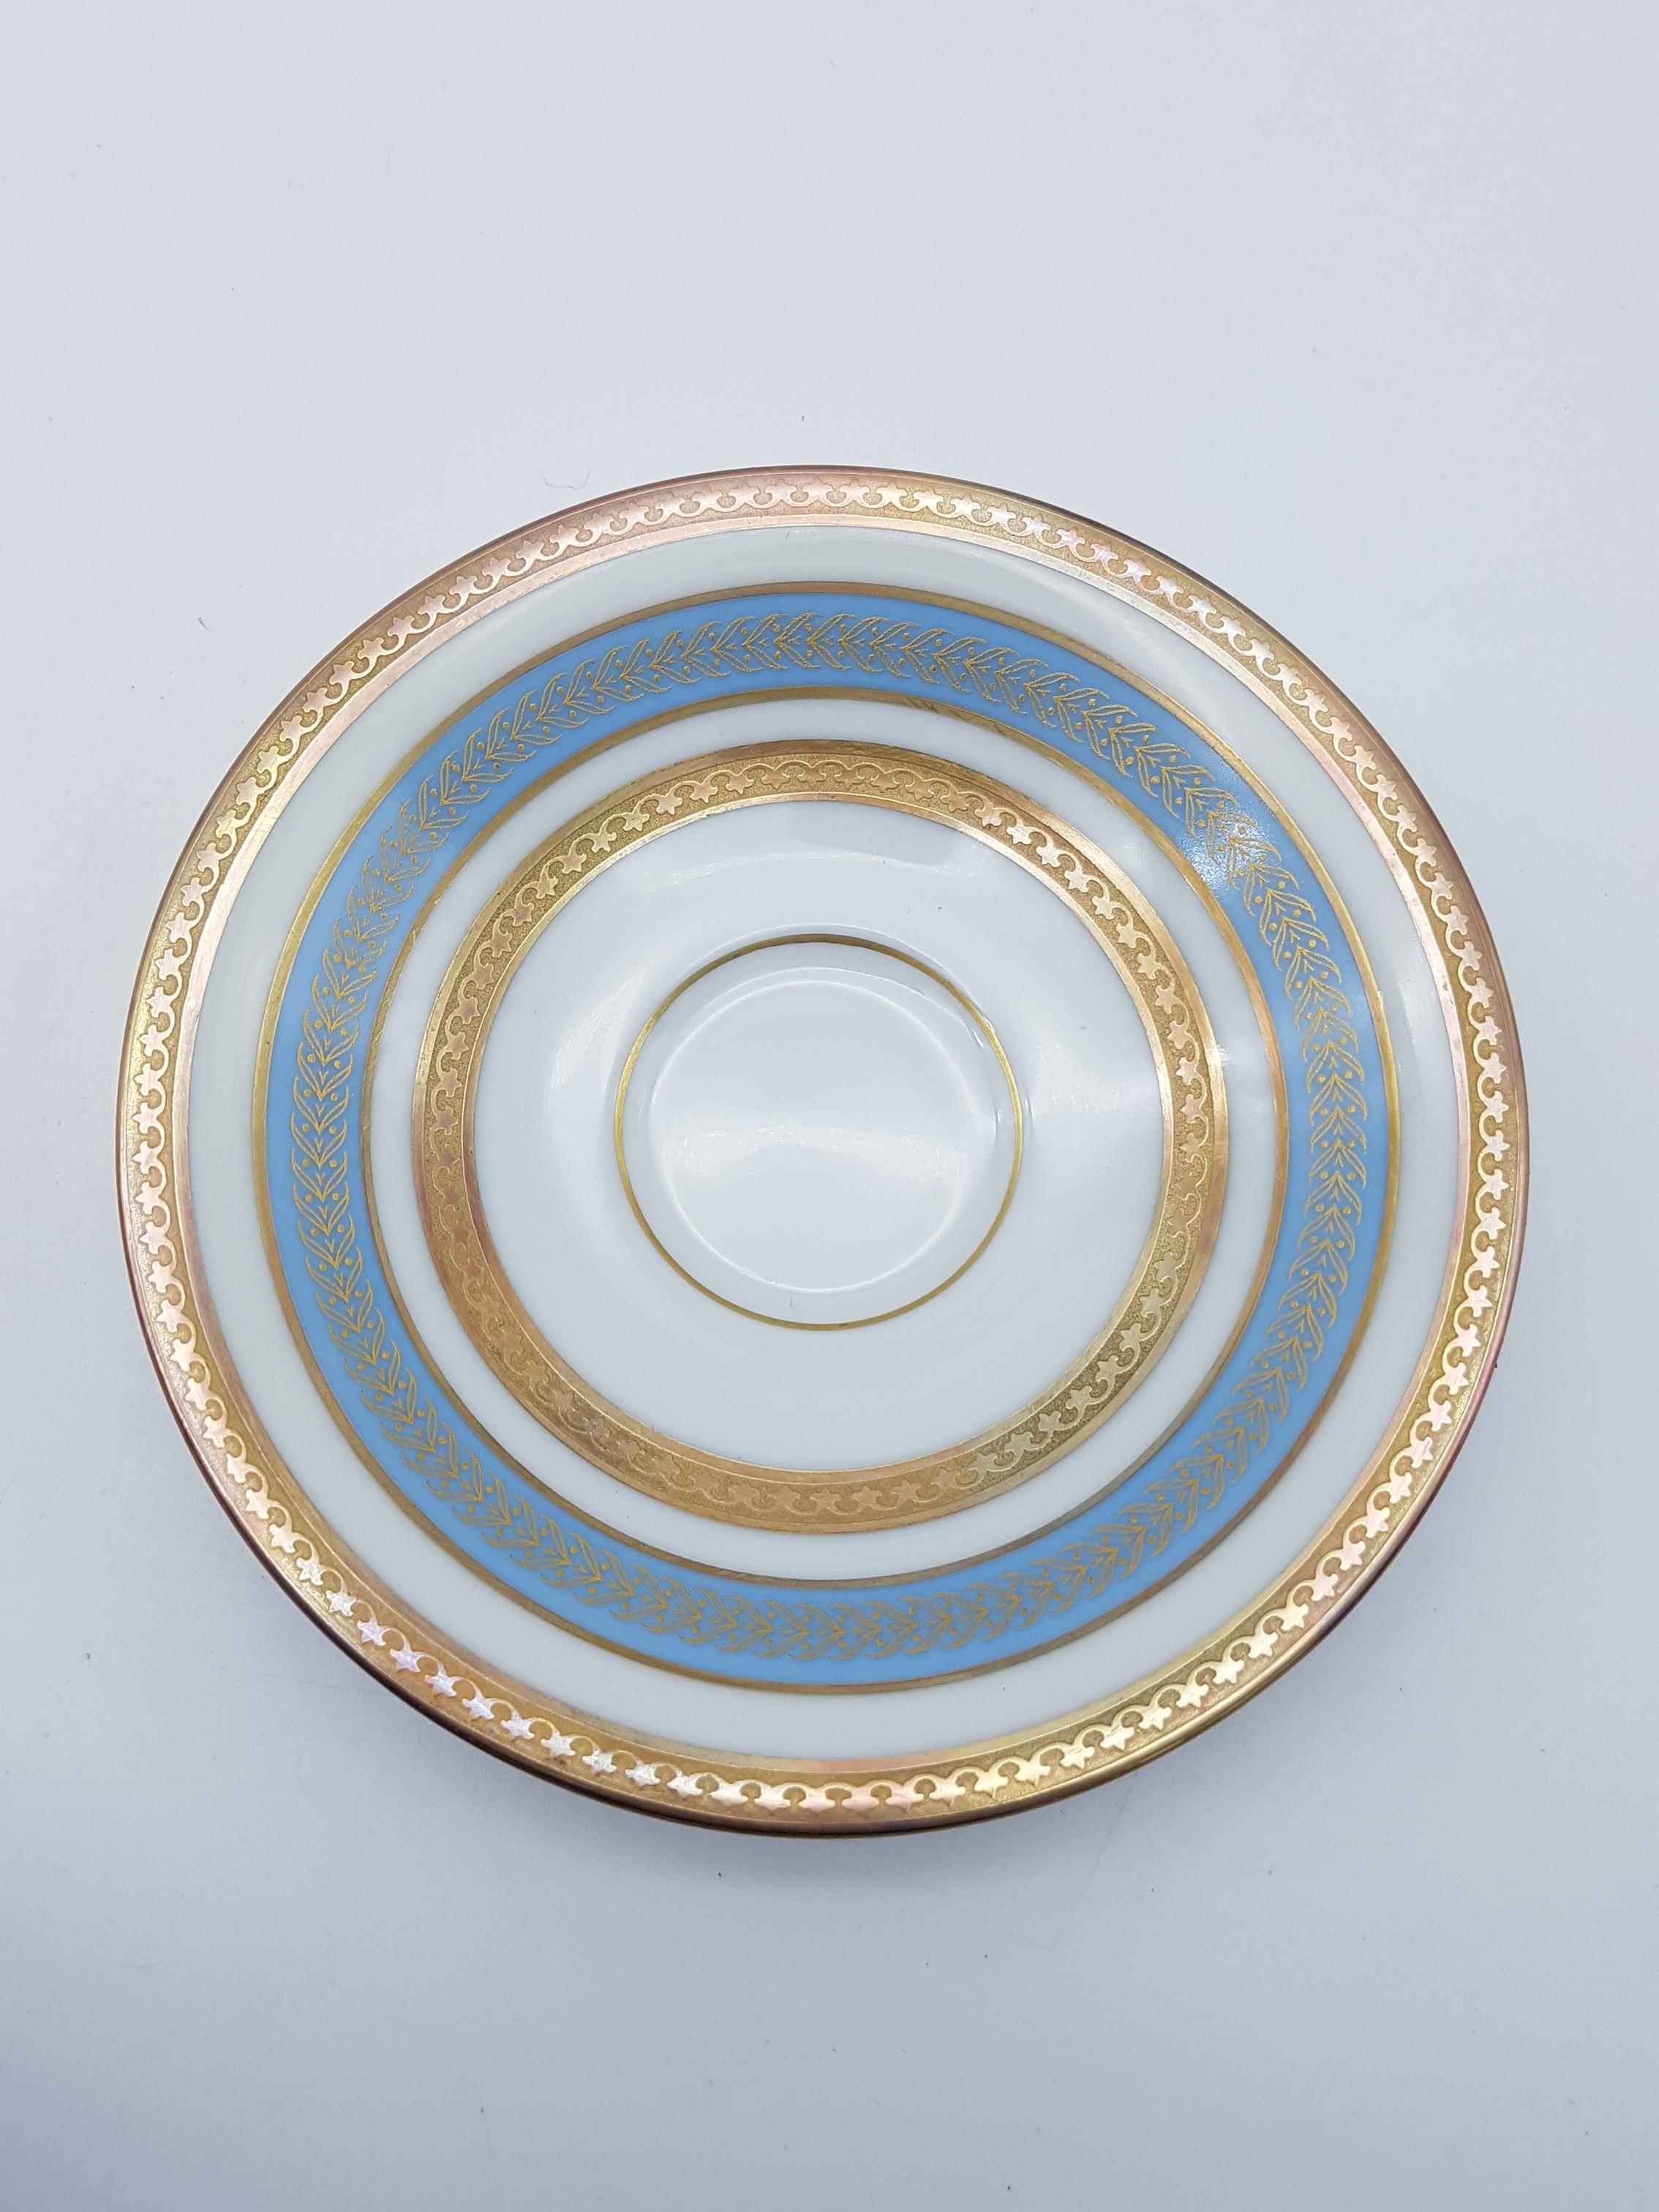 Beautiful set of 12-piece coffee-service, manufactured in Germany by Heinrich & Co, circa 1960s-1970s. The service consists of 6x tea-cups and 6x saucers. All pieces are delicately decorated with a gold rim and a turquoise / sky blue band. No chip